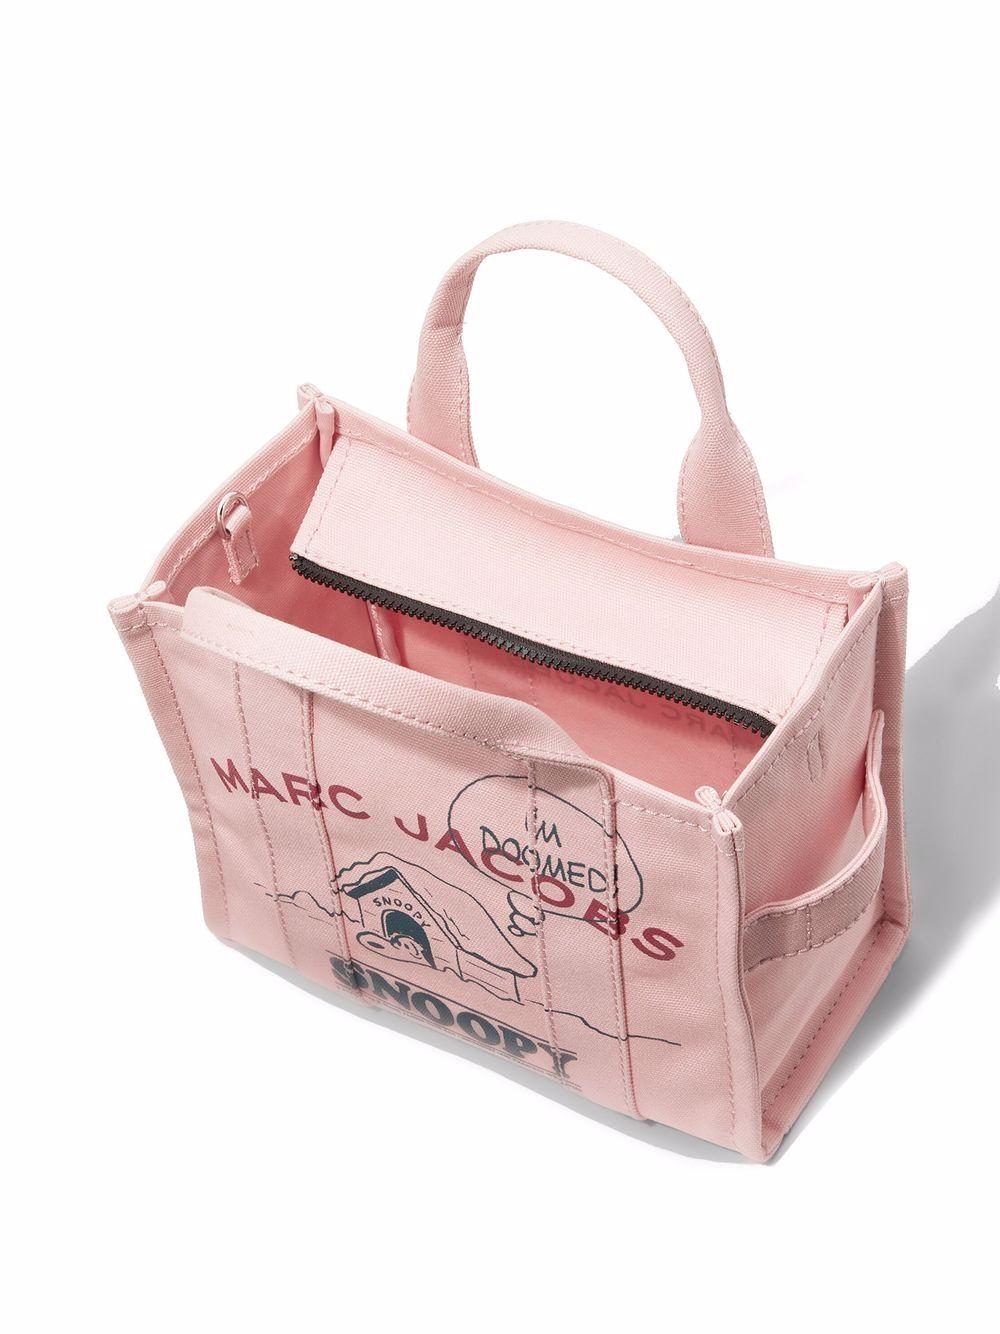 Totes bags Marc Jacobs - The Snoopy Mini tote - H025M06FA21661